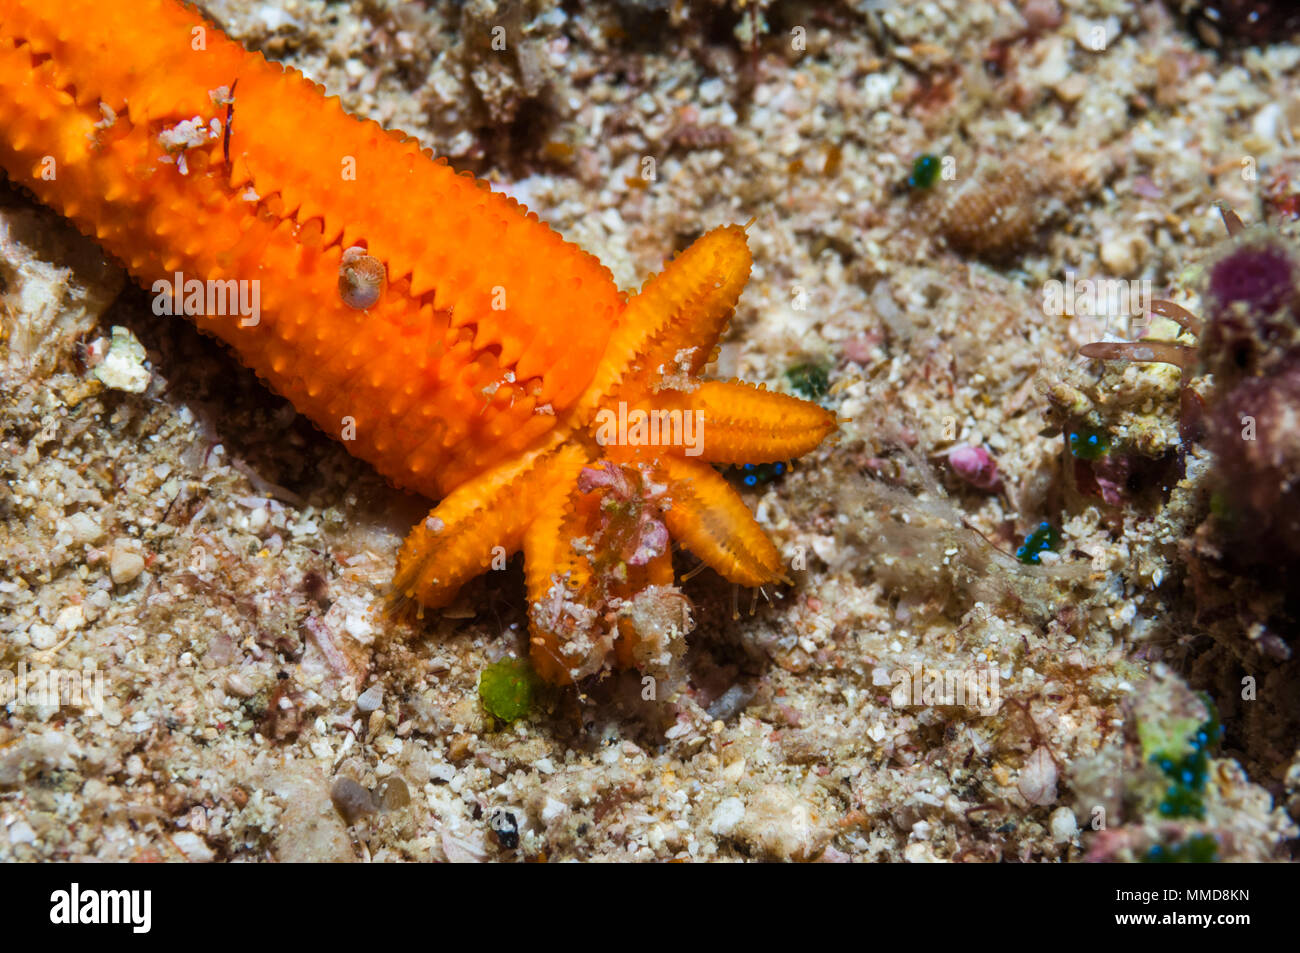 Comet: Severed arm of Porous starfish [Fromia milleporella] regenerating 5 new arms.  West Papua, Indonesia. Stock Photo